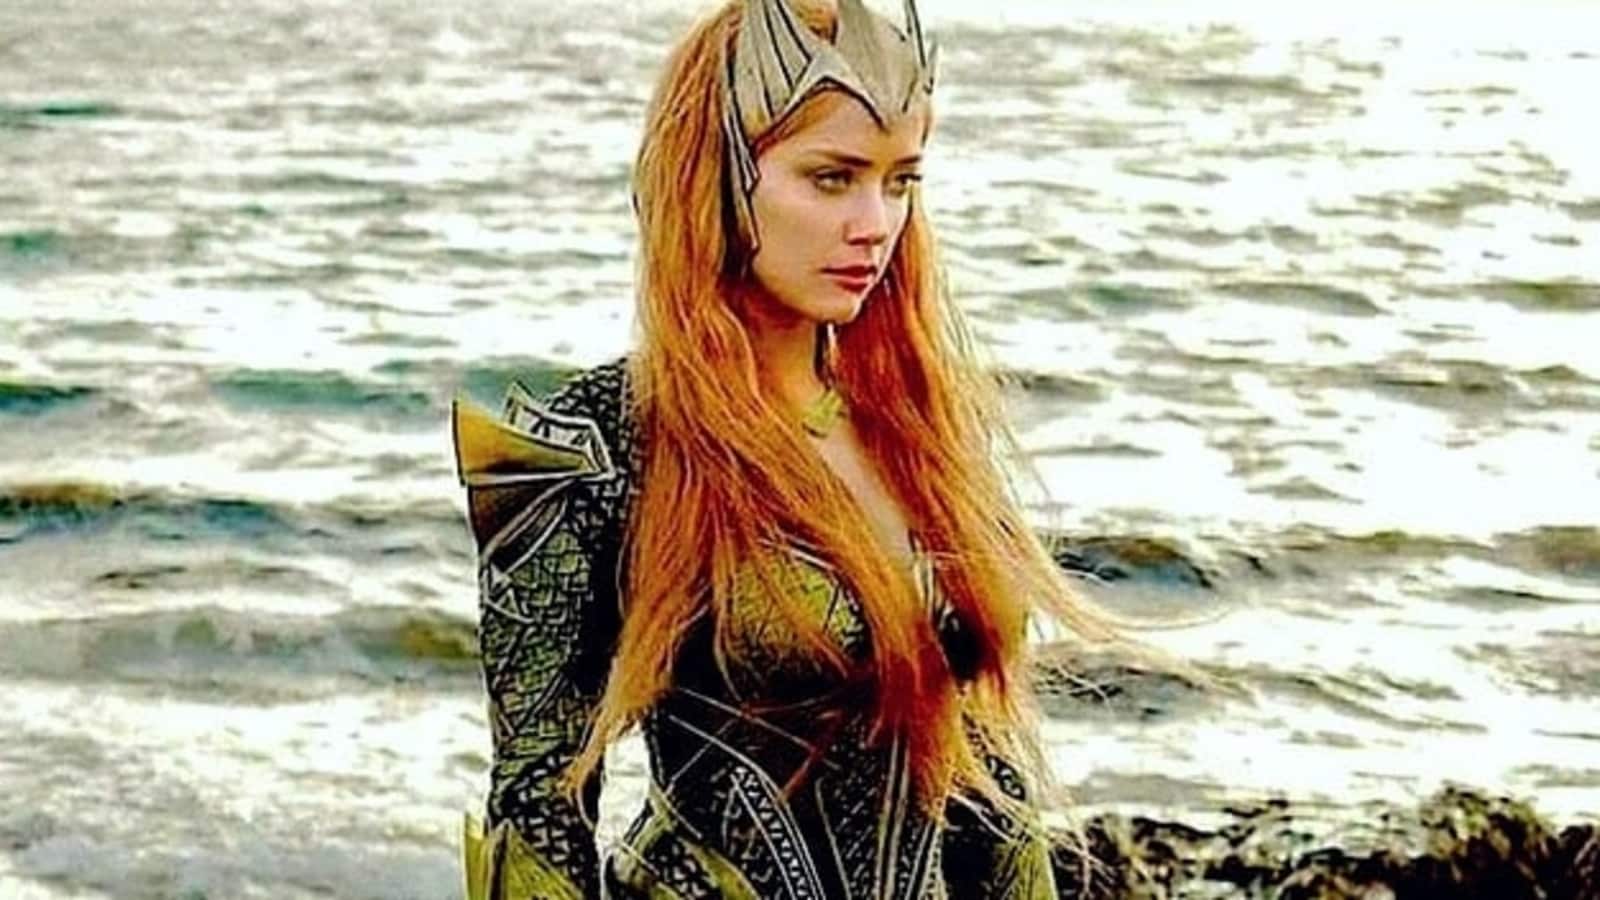 Amber Heard reacts to ‘insensitive’ reports that she is being replaced in Aquaman and the Lost Kingdom